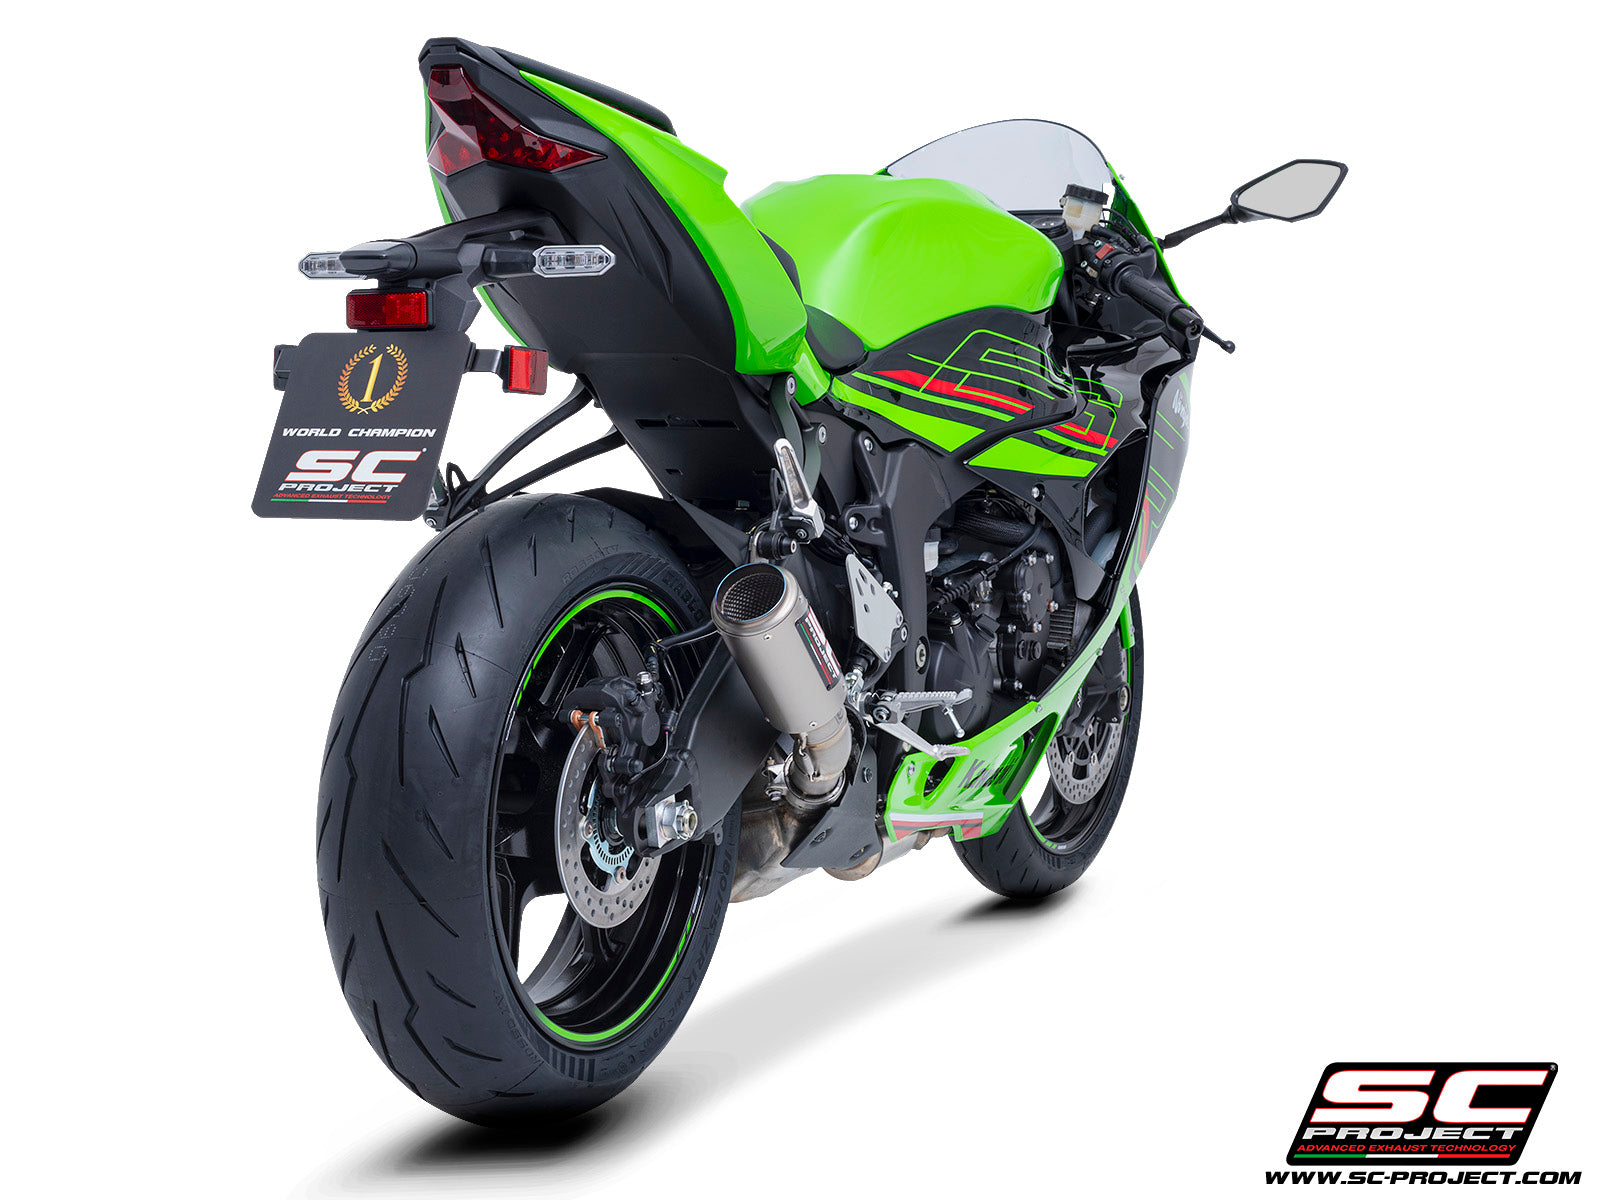 SC-PROJECT】バイク用マフラー | ZX-6R 製品情報 – iMotorcycle Japan